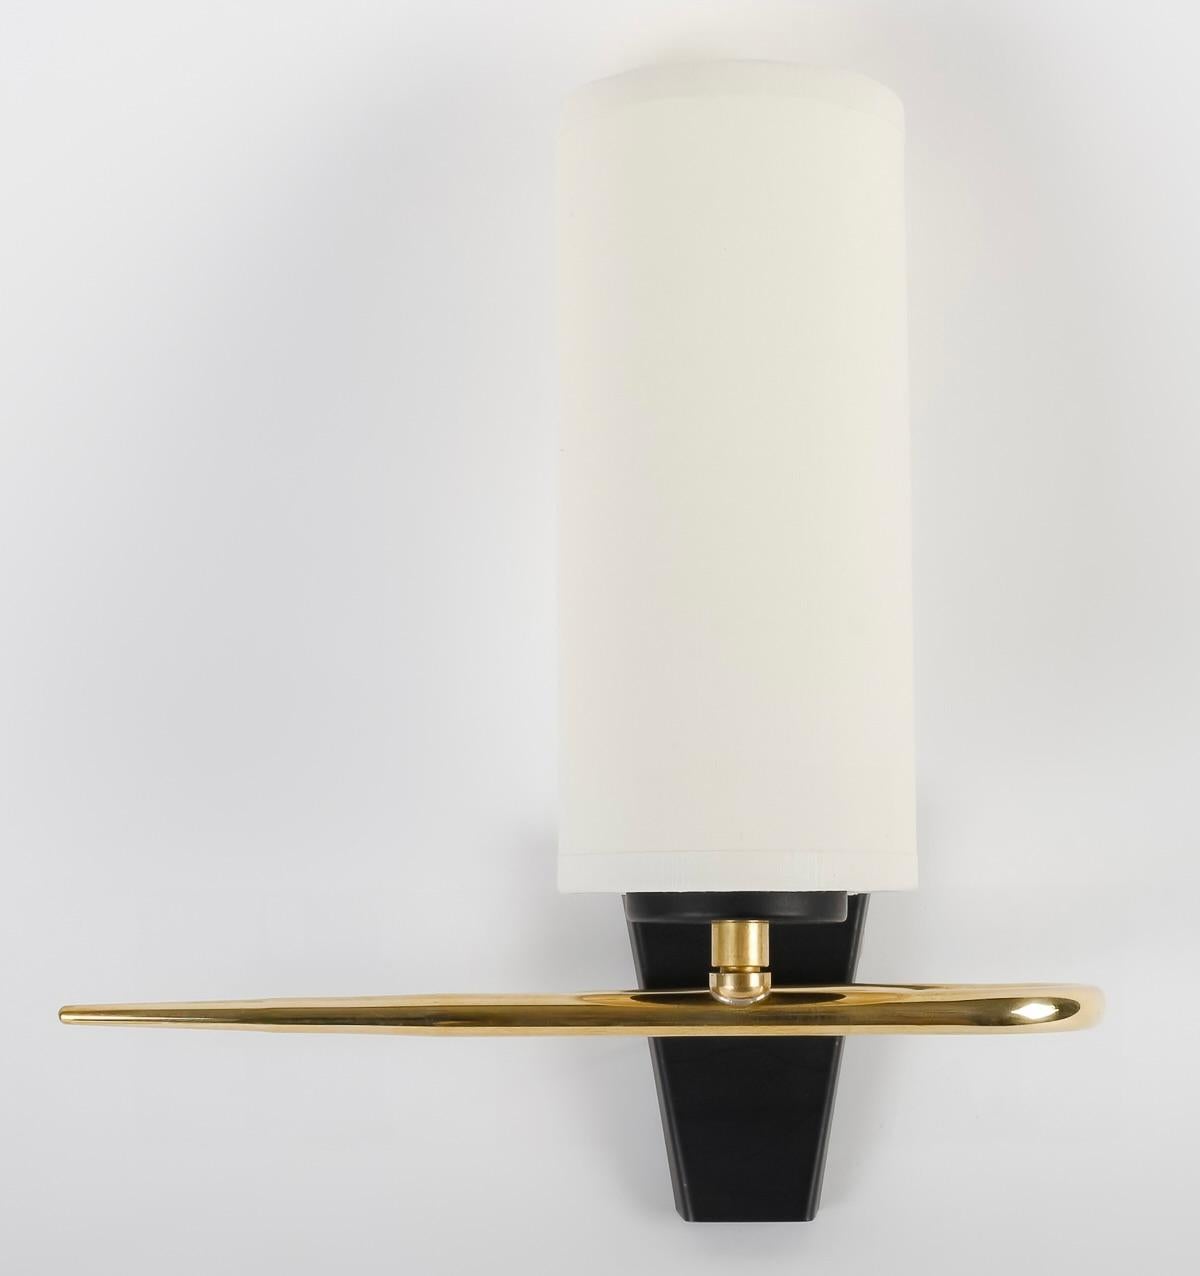 1950 Pair of Maison Arlus sconces

Composed of a black wall bracket in the shape of an inverted trapezium on which rests a rod forming a U positioned horizontally on the front of the sconce ending in a gilded brass tip.
In the upper center of the